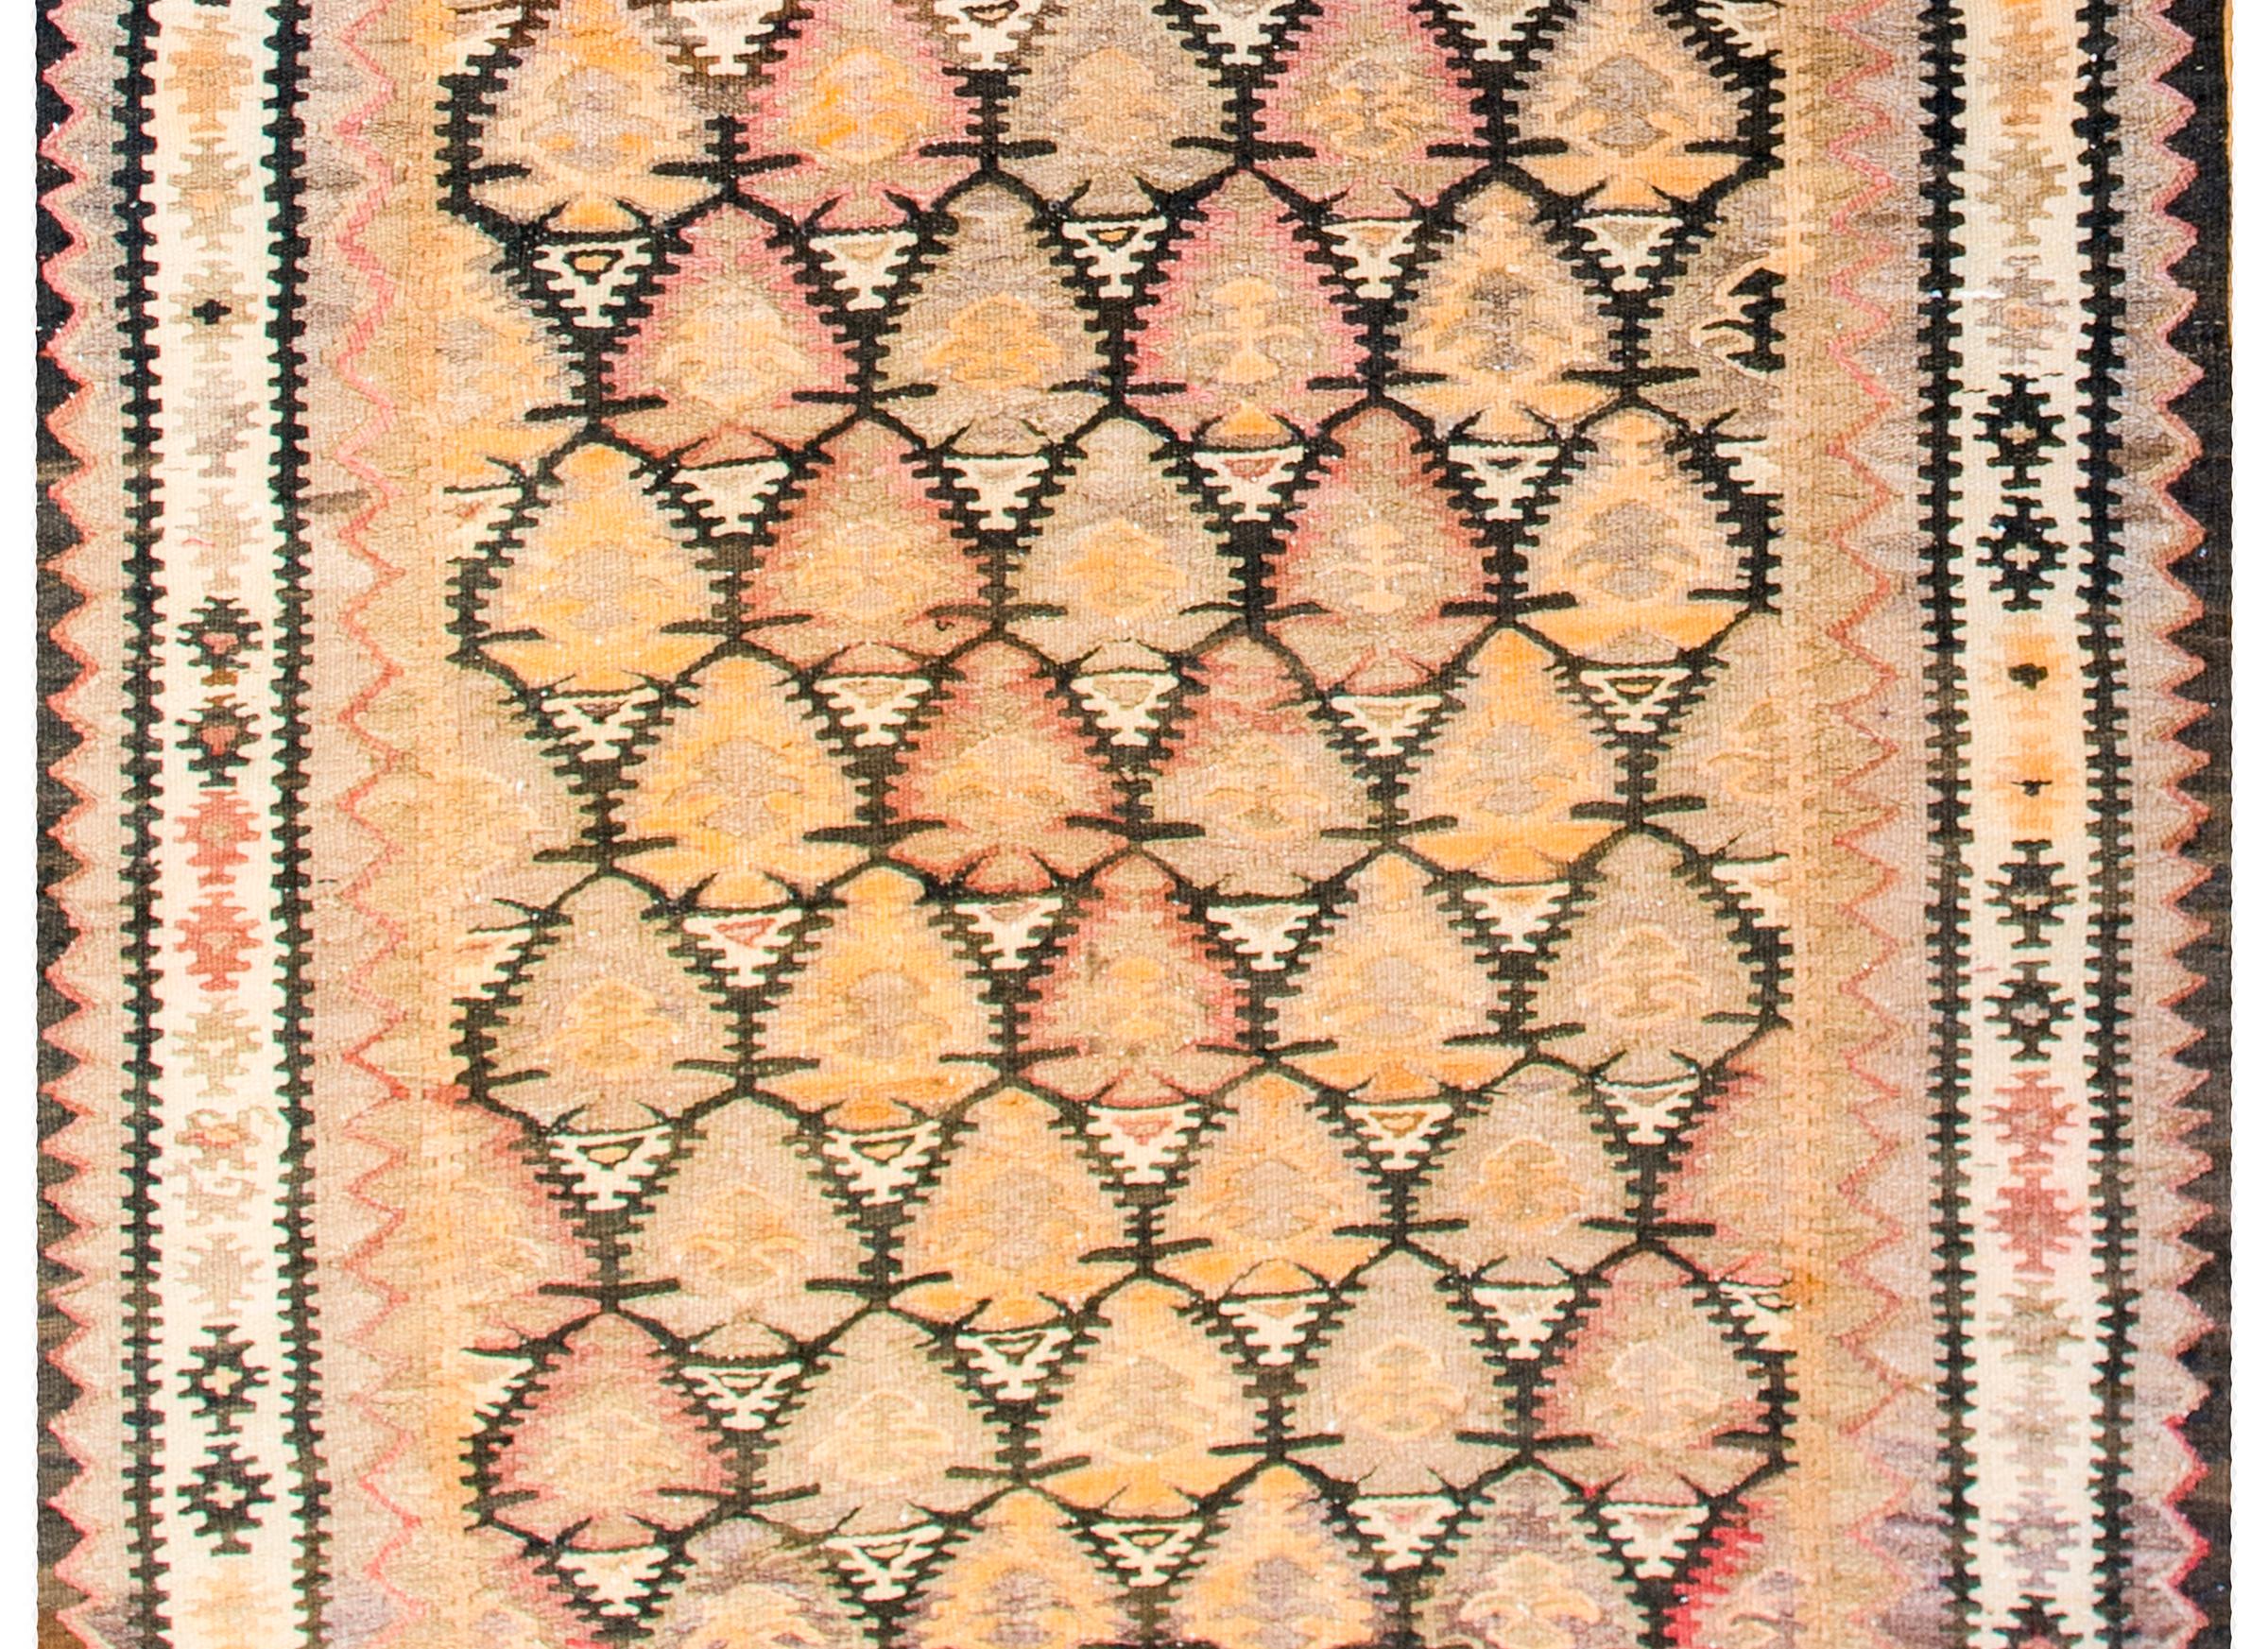 A beautiful mid-20th century Persian Qazvin Kilim rug with an all-over tree-of-life pattern woven with orange, lilac, crimson, and natural wool colored vegetable dyed wool. The border is complex, with three distinct geometric patterns, with the